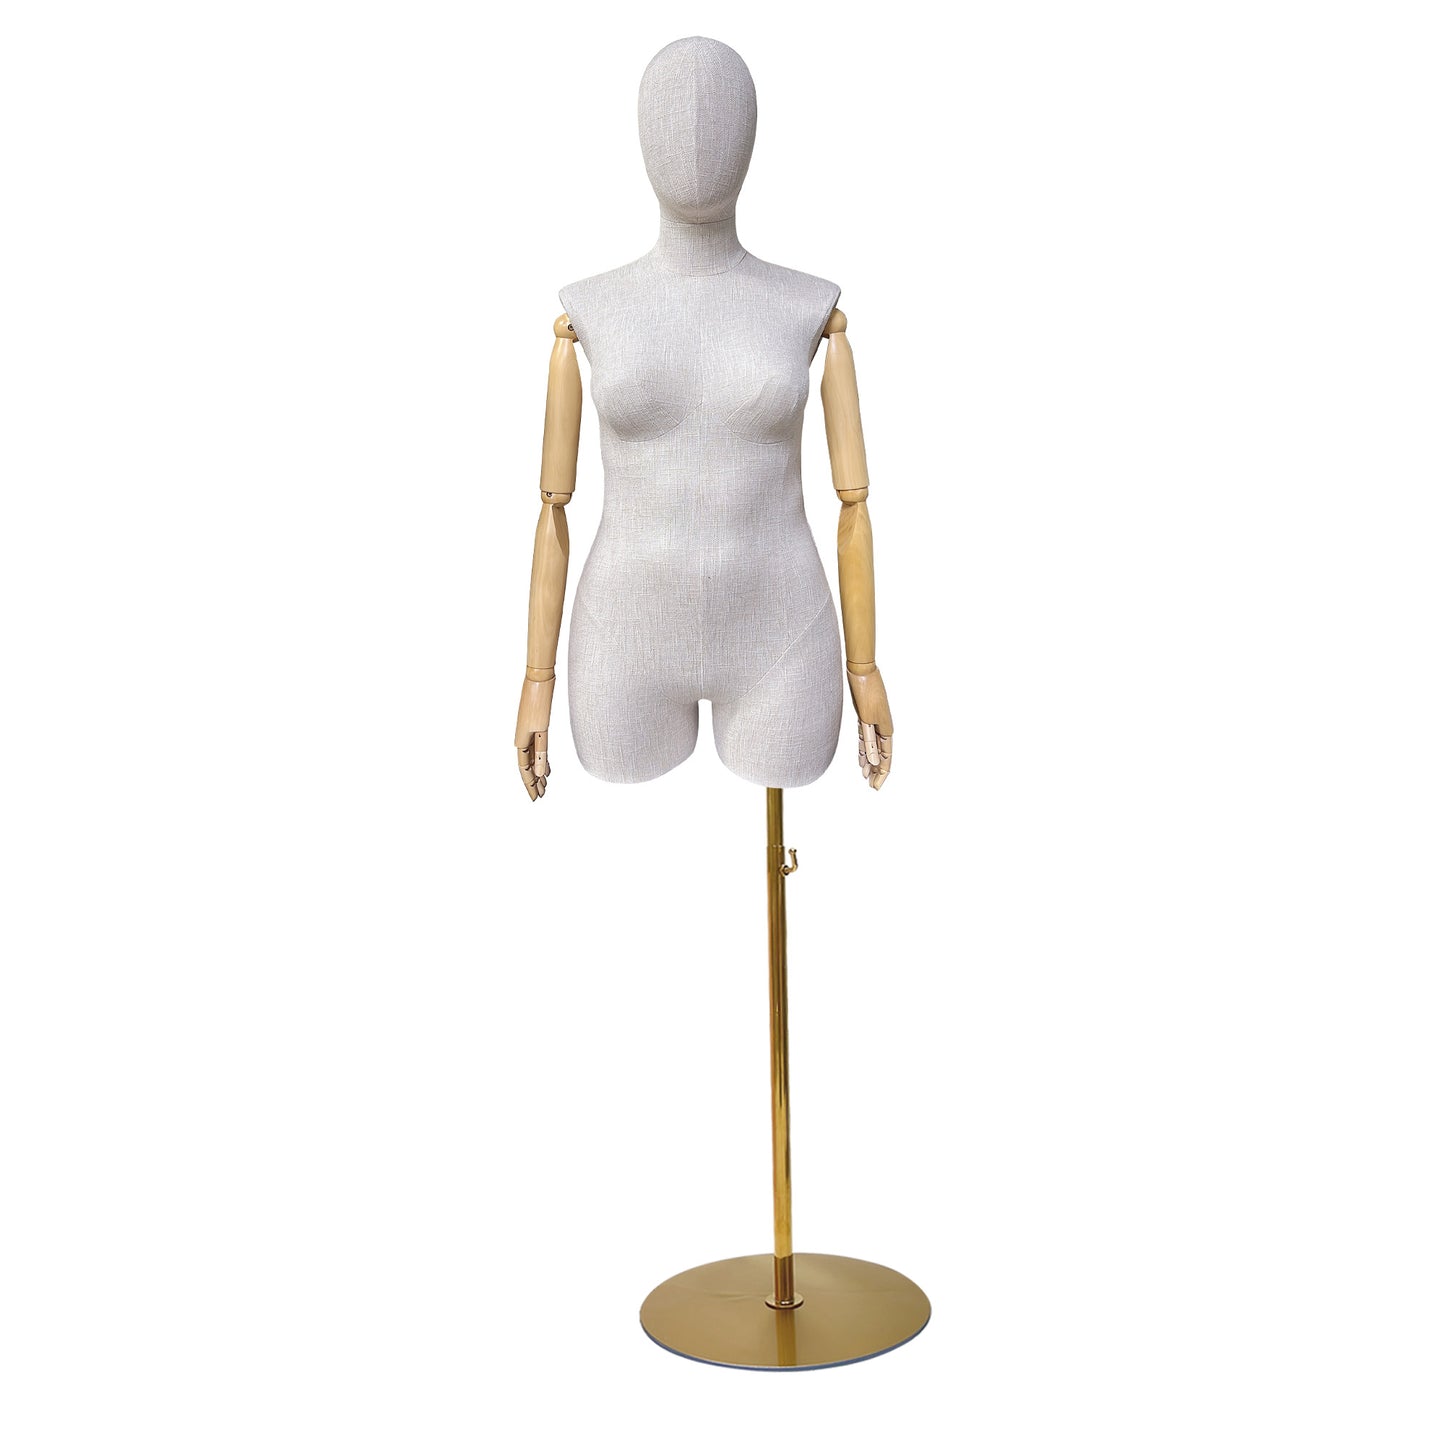 Adult Female Plus Size Torso Mannequin,Half Body Mannequin Torso,Bamboo Linen Fabric Clothing Dress Form,Adult Props with Wooden Arms,Mannequin for Cloth Window Display DE-LIANG